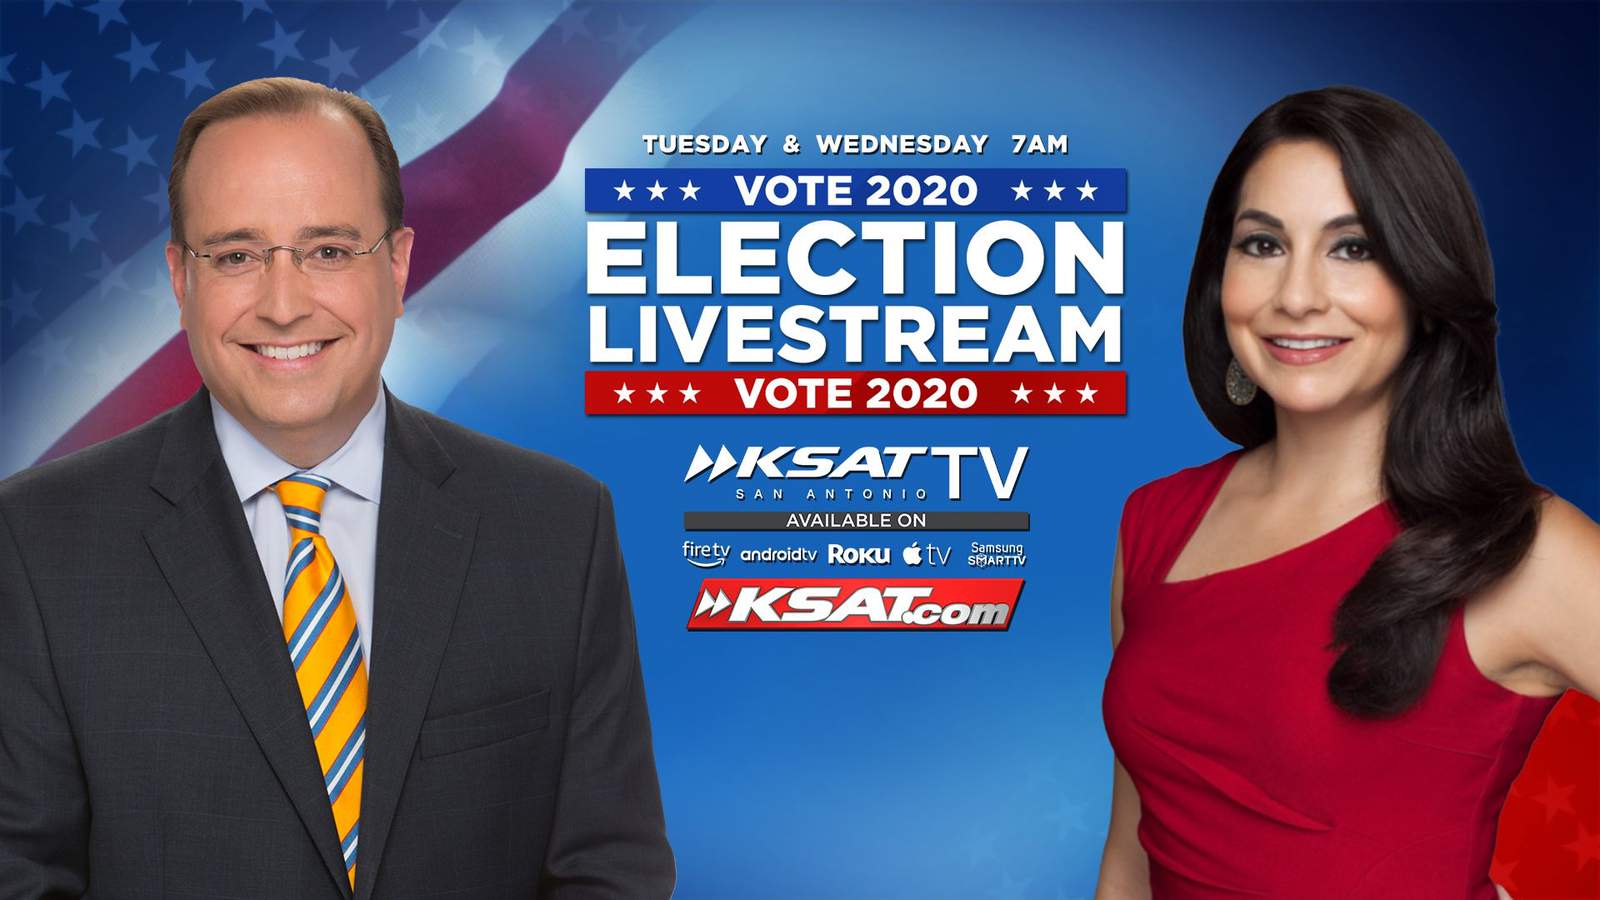 WATCH: Kick off Election Day 2020 with KSAT anchors, reporters with 7 a.m. livestream